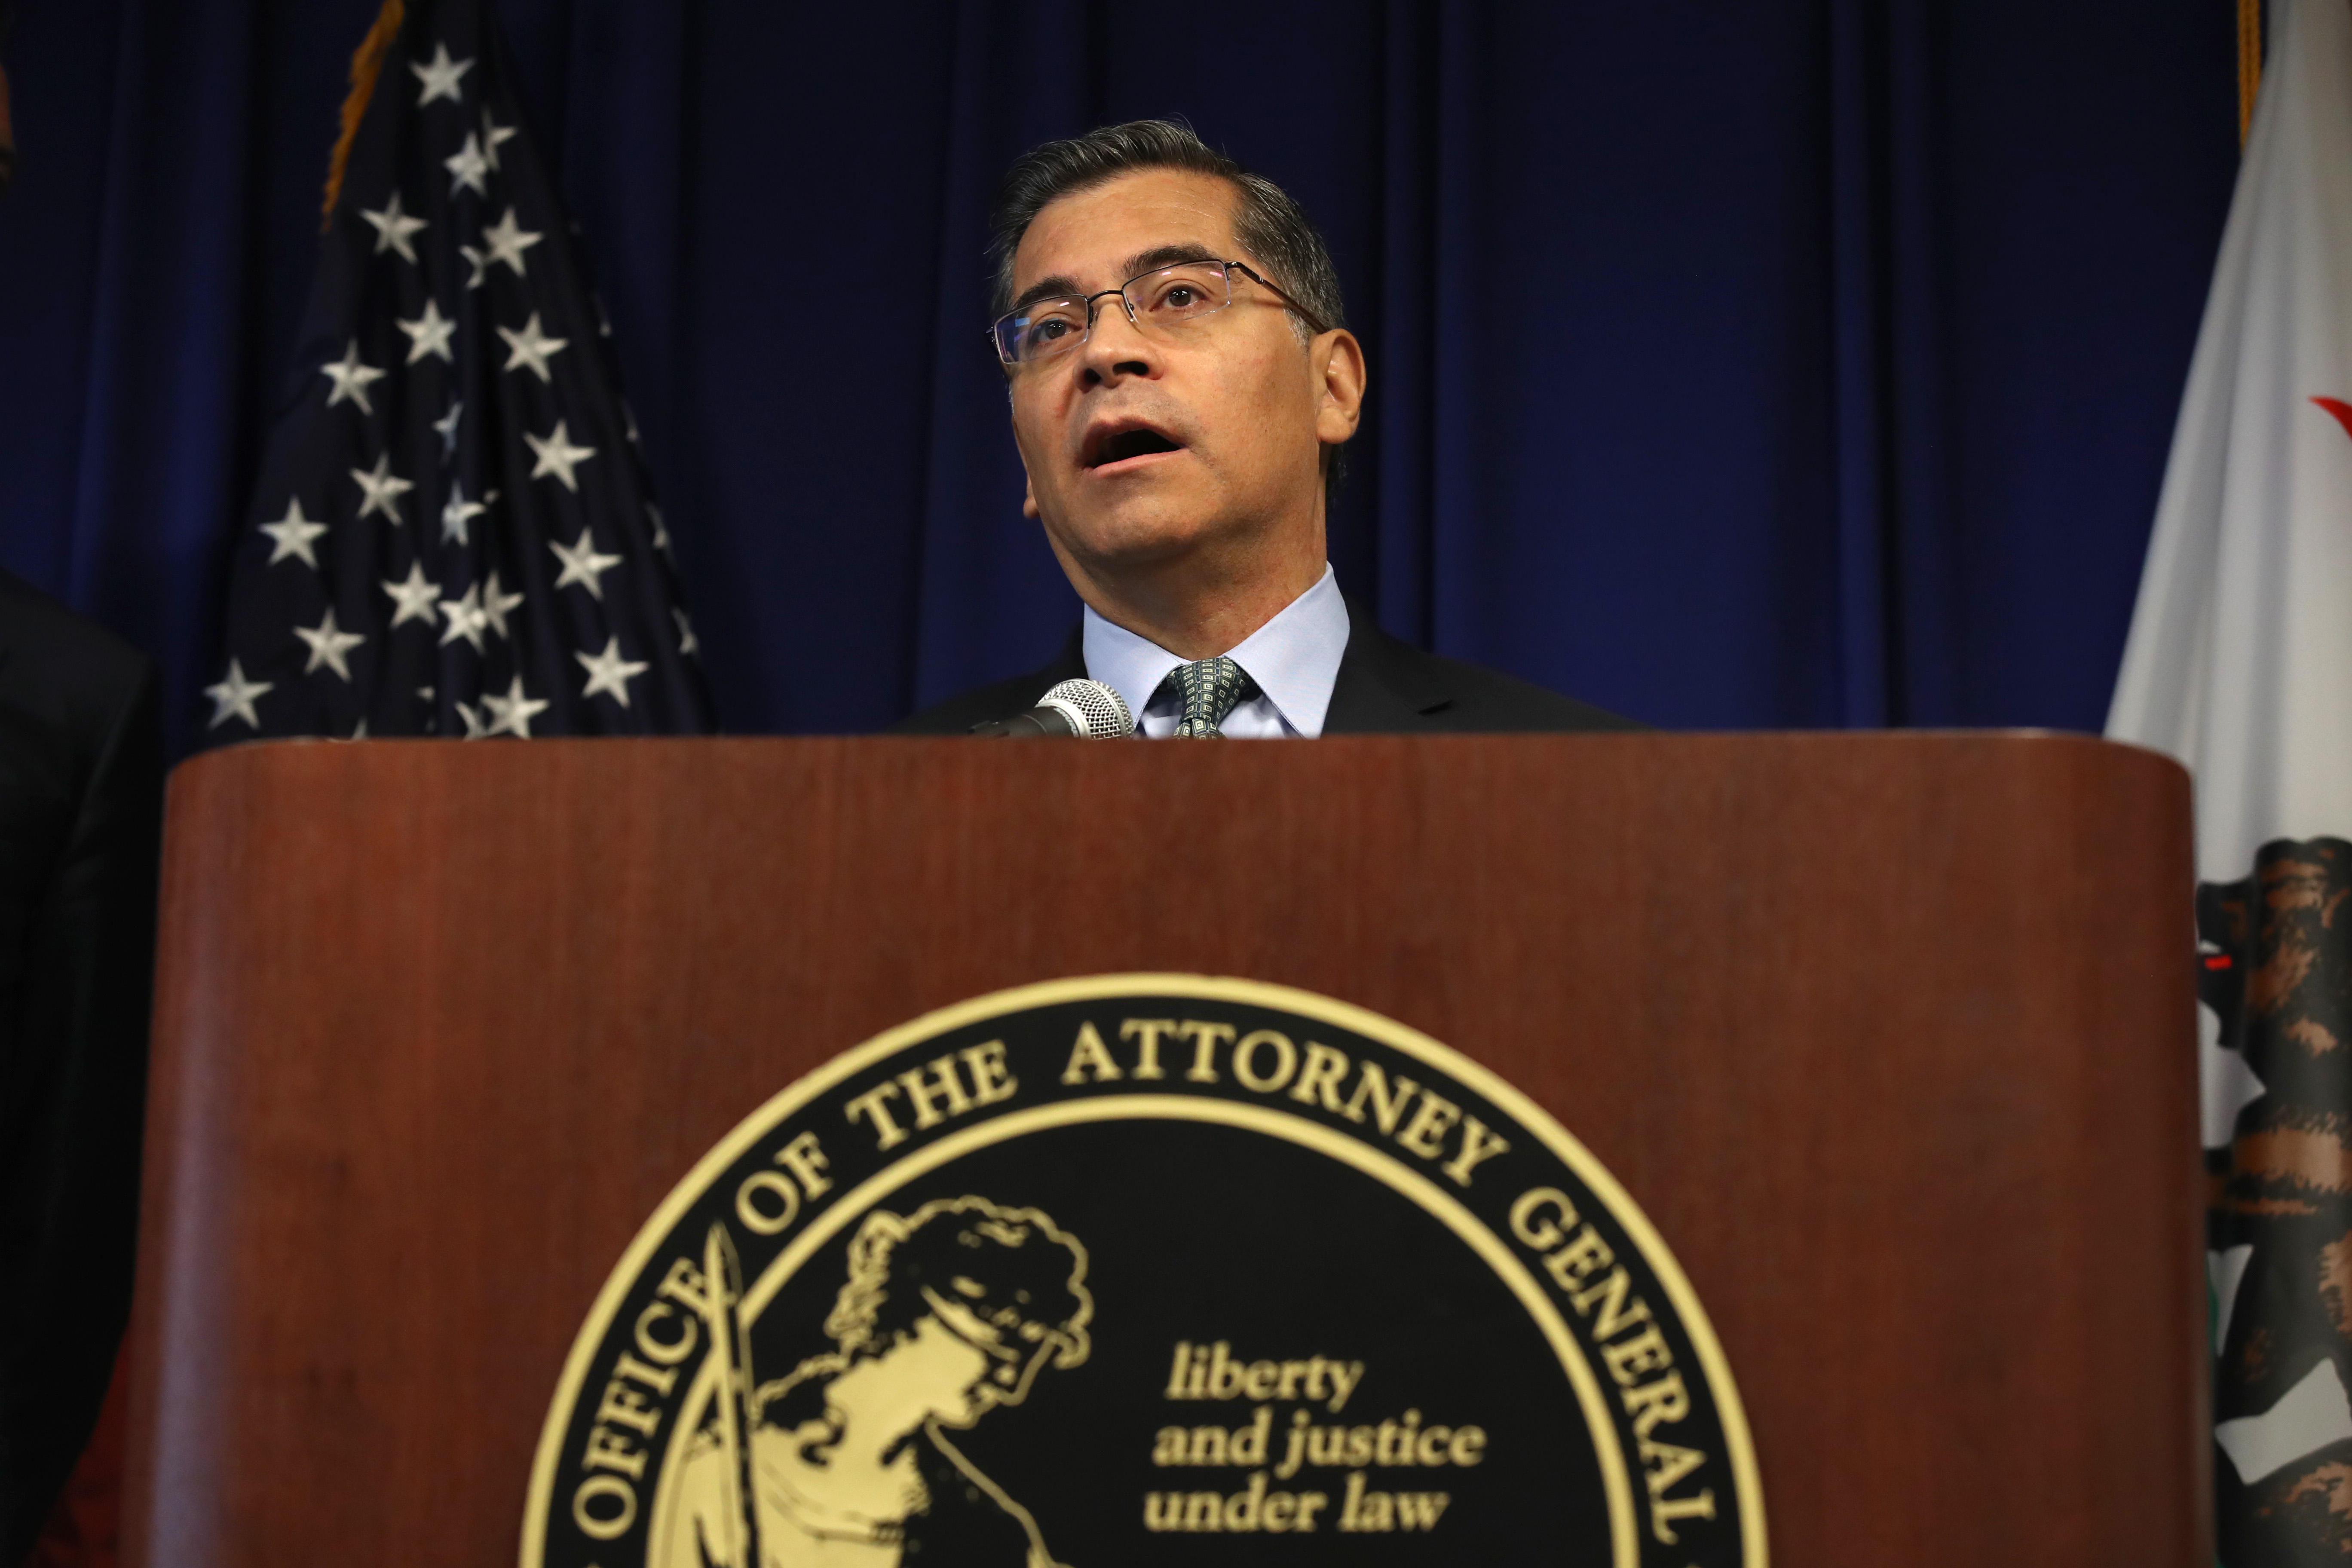 California Attorney General Xavier Becerra speaks during a news conference on September 18, 2019. (Justin Sullivan/Getty Images)